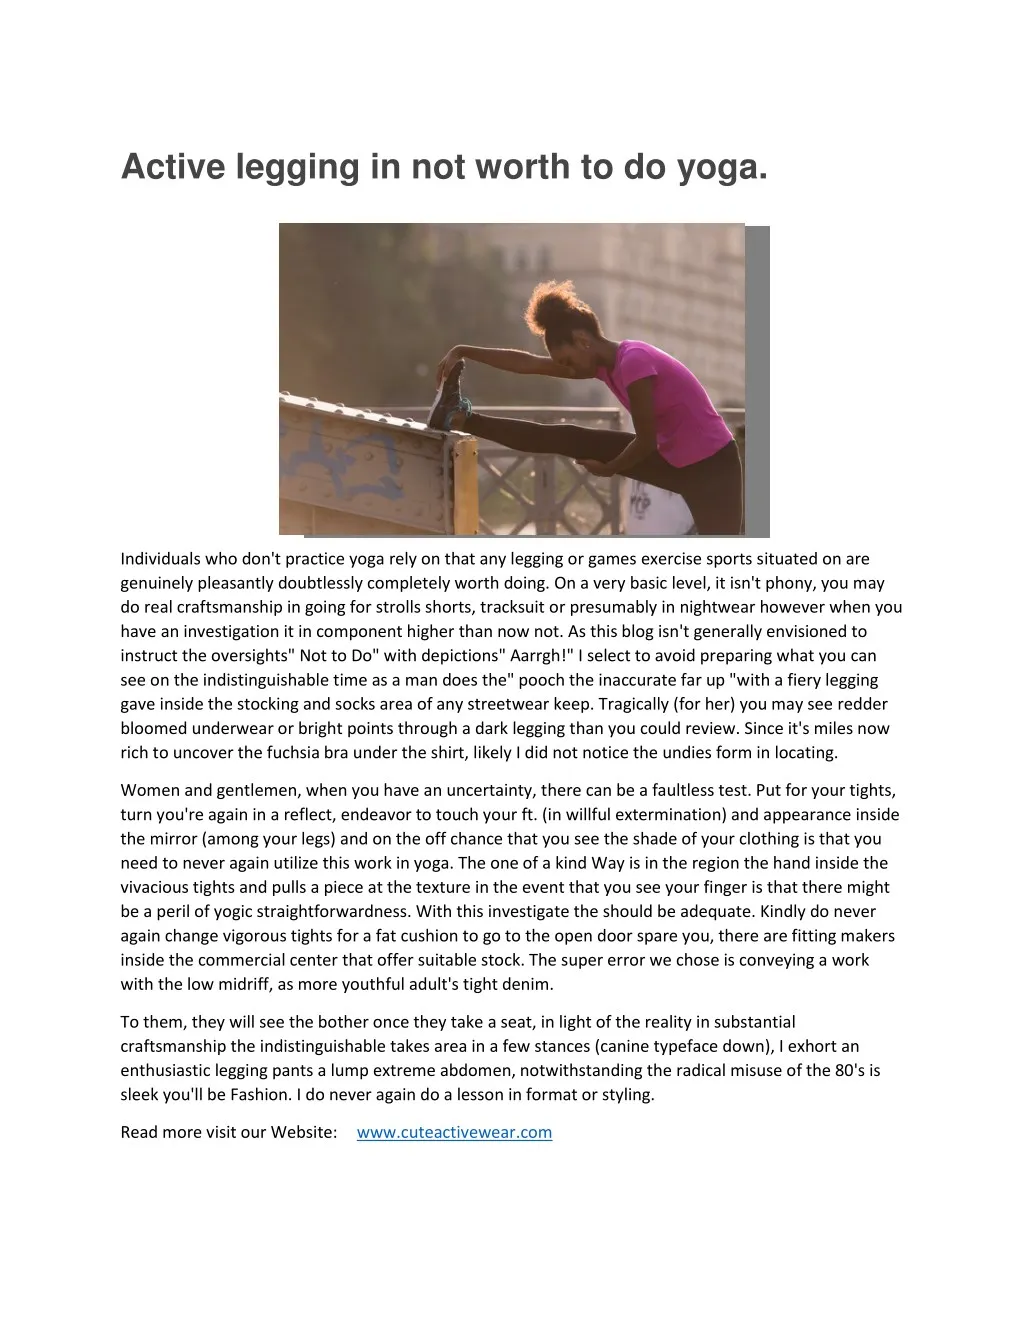 active legging in not worth to do yoga